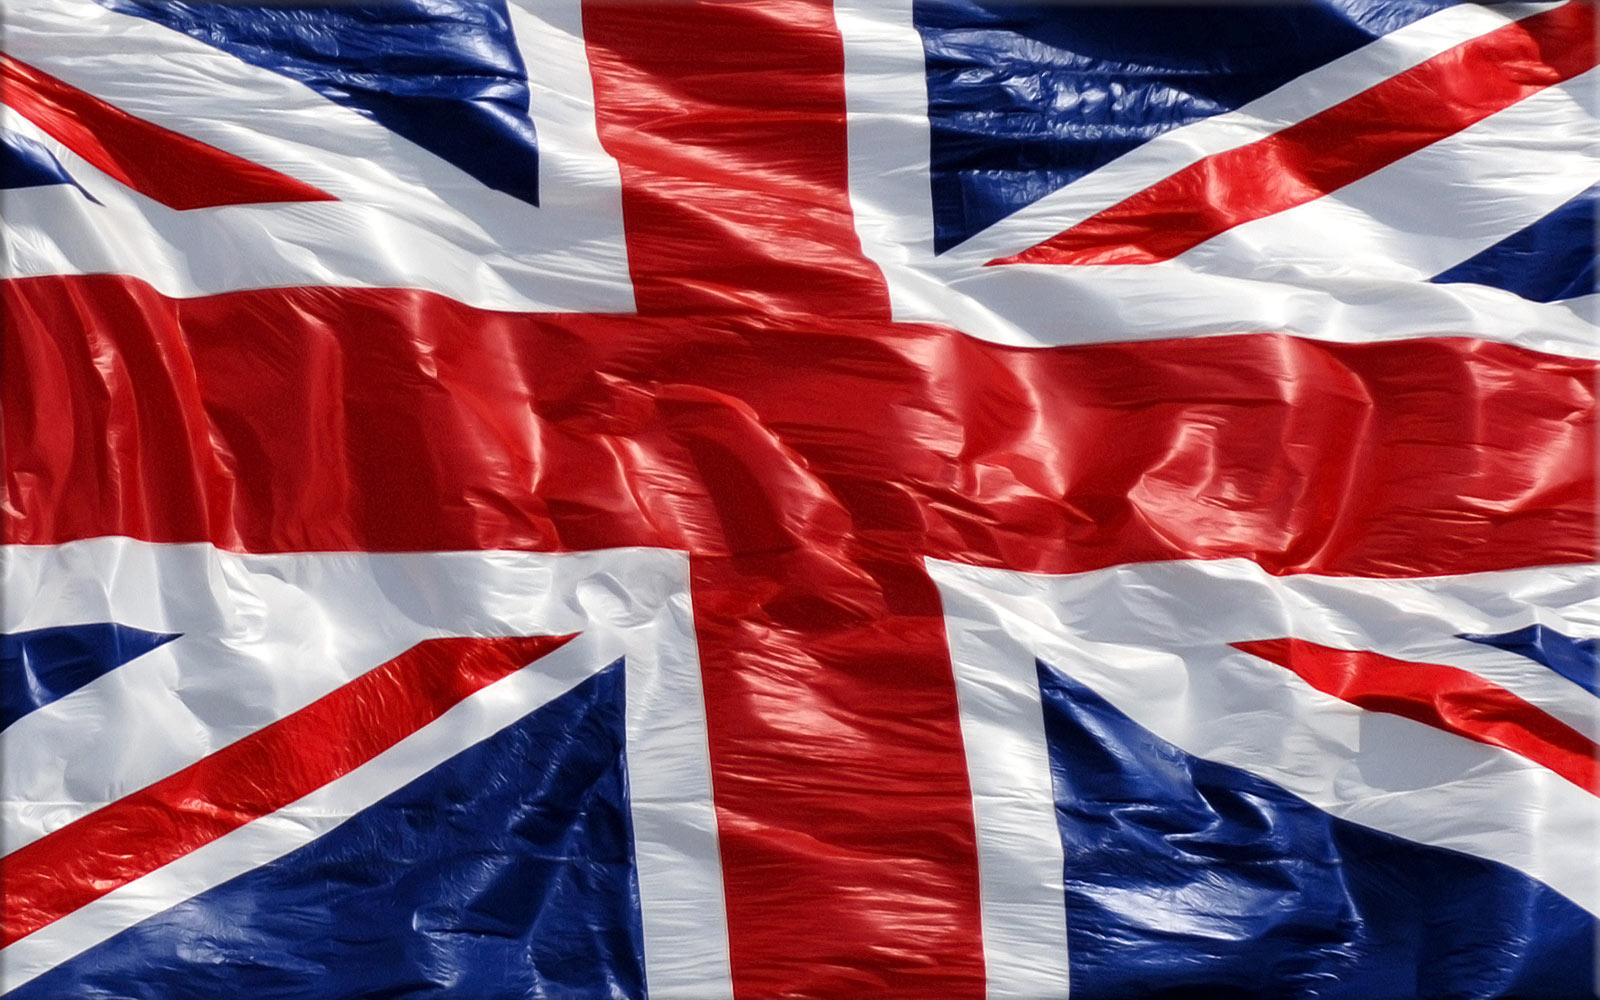 The Union Flag is adopted as the flag of Great Britain on April 12th, 1606